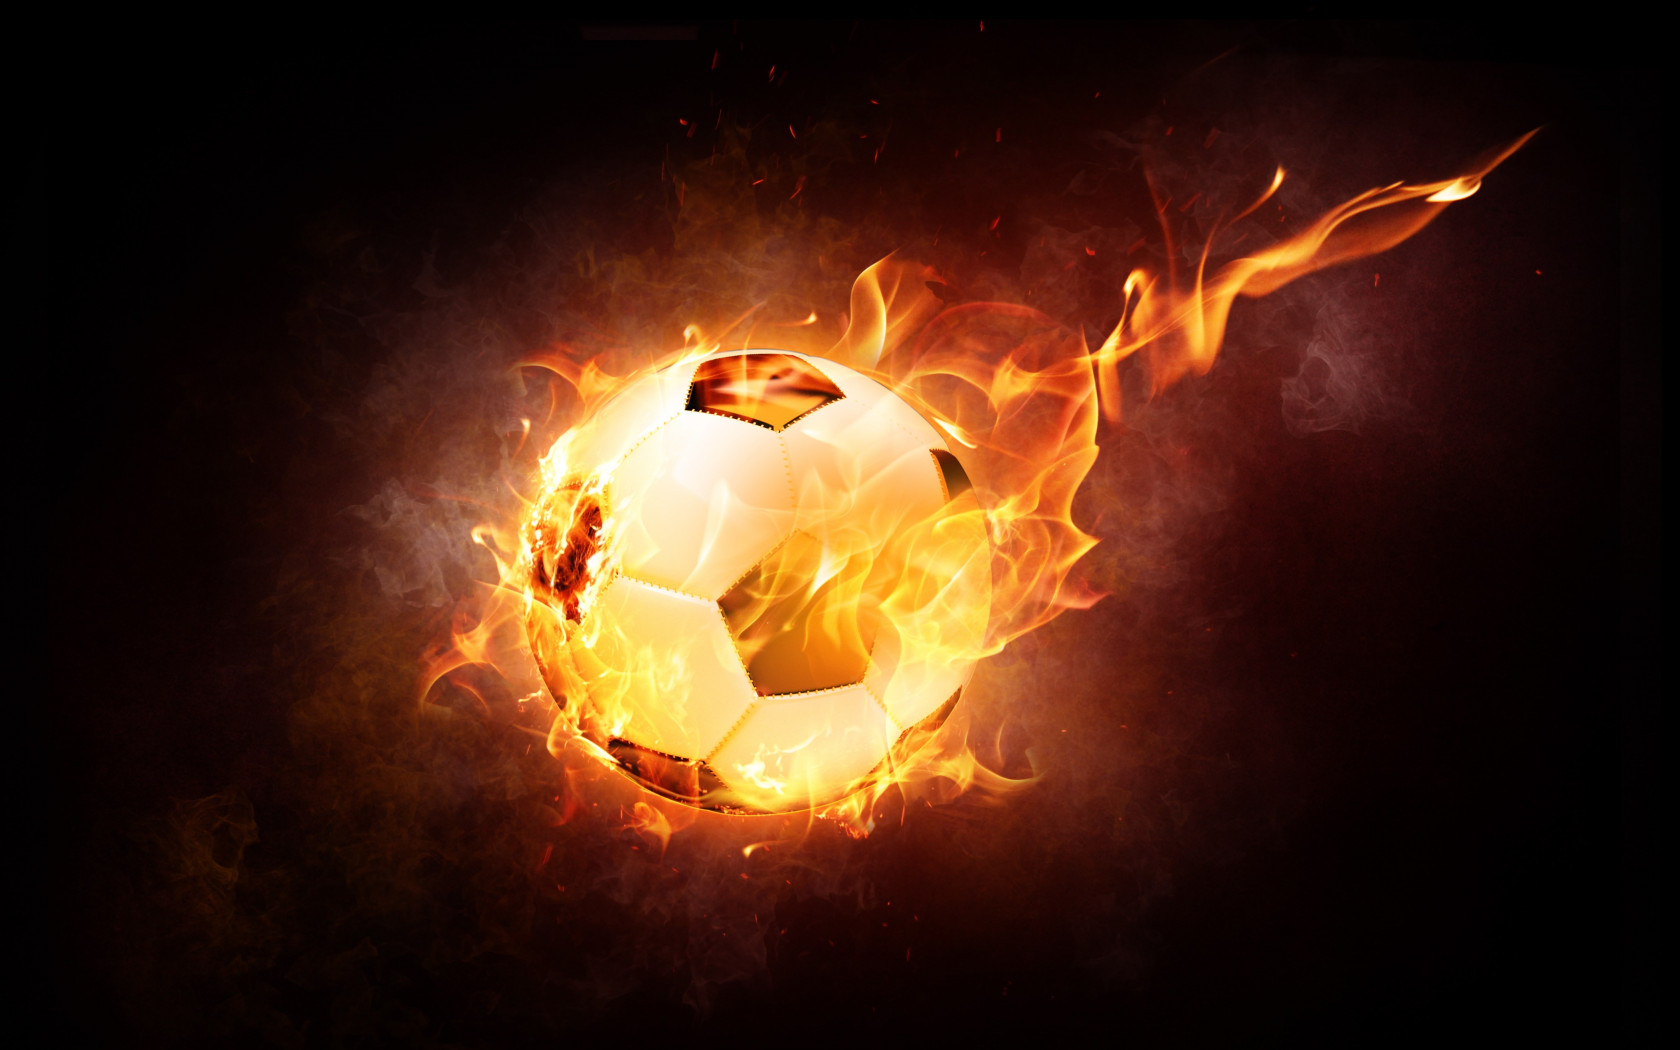 The football ball is on fire wallpaper 1680x1050